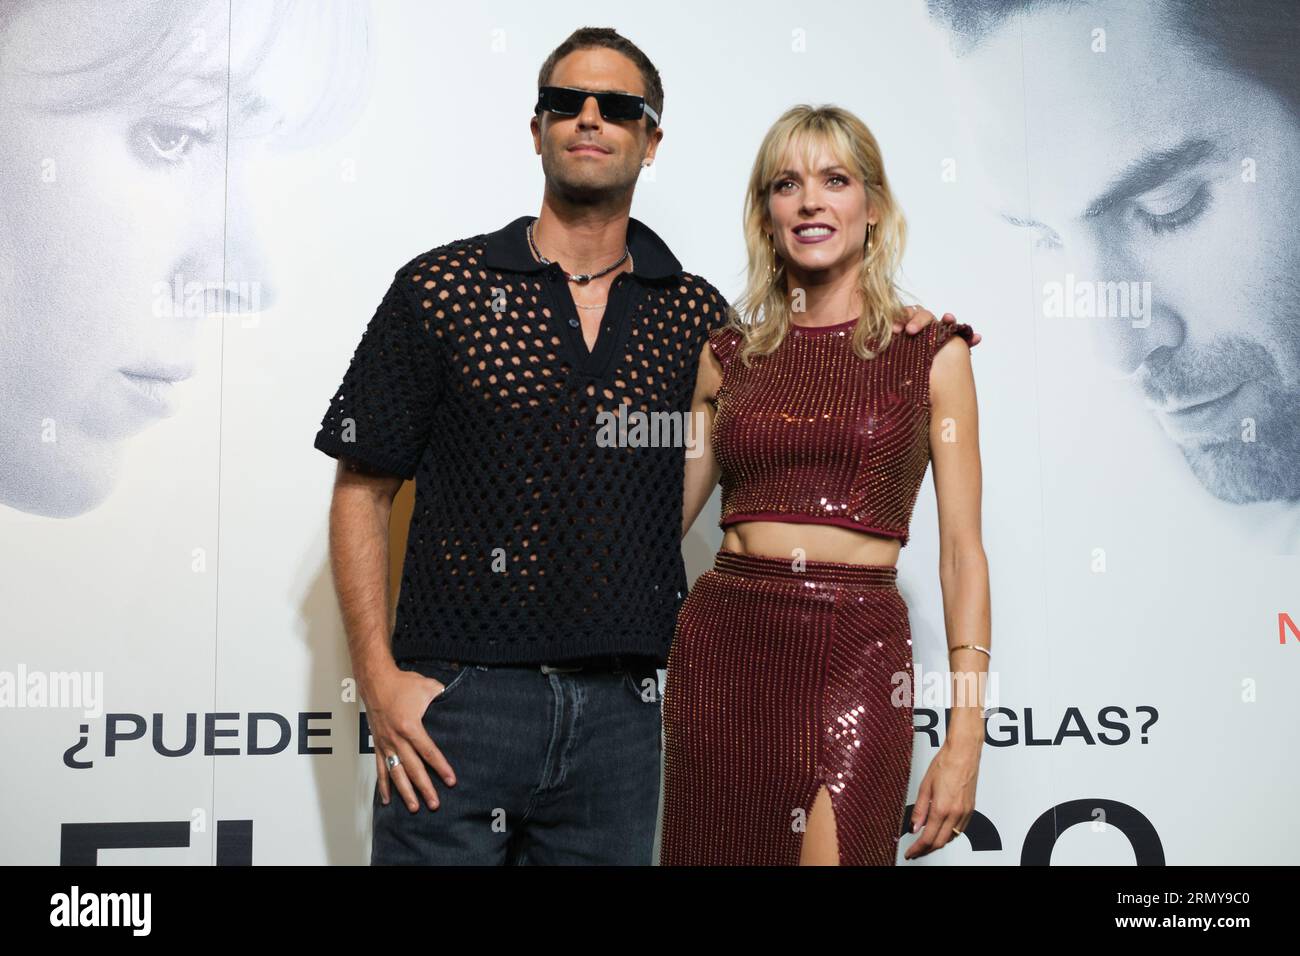 Maggie Civantos and Nico Furtado during the photocall the premiere of "The Game" in Madrid. 30 August 2023, Spain Stock Photo